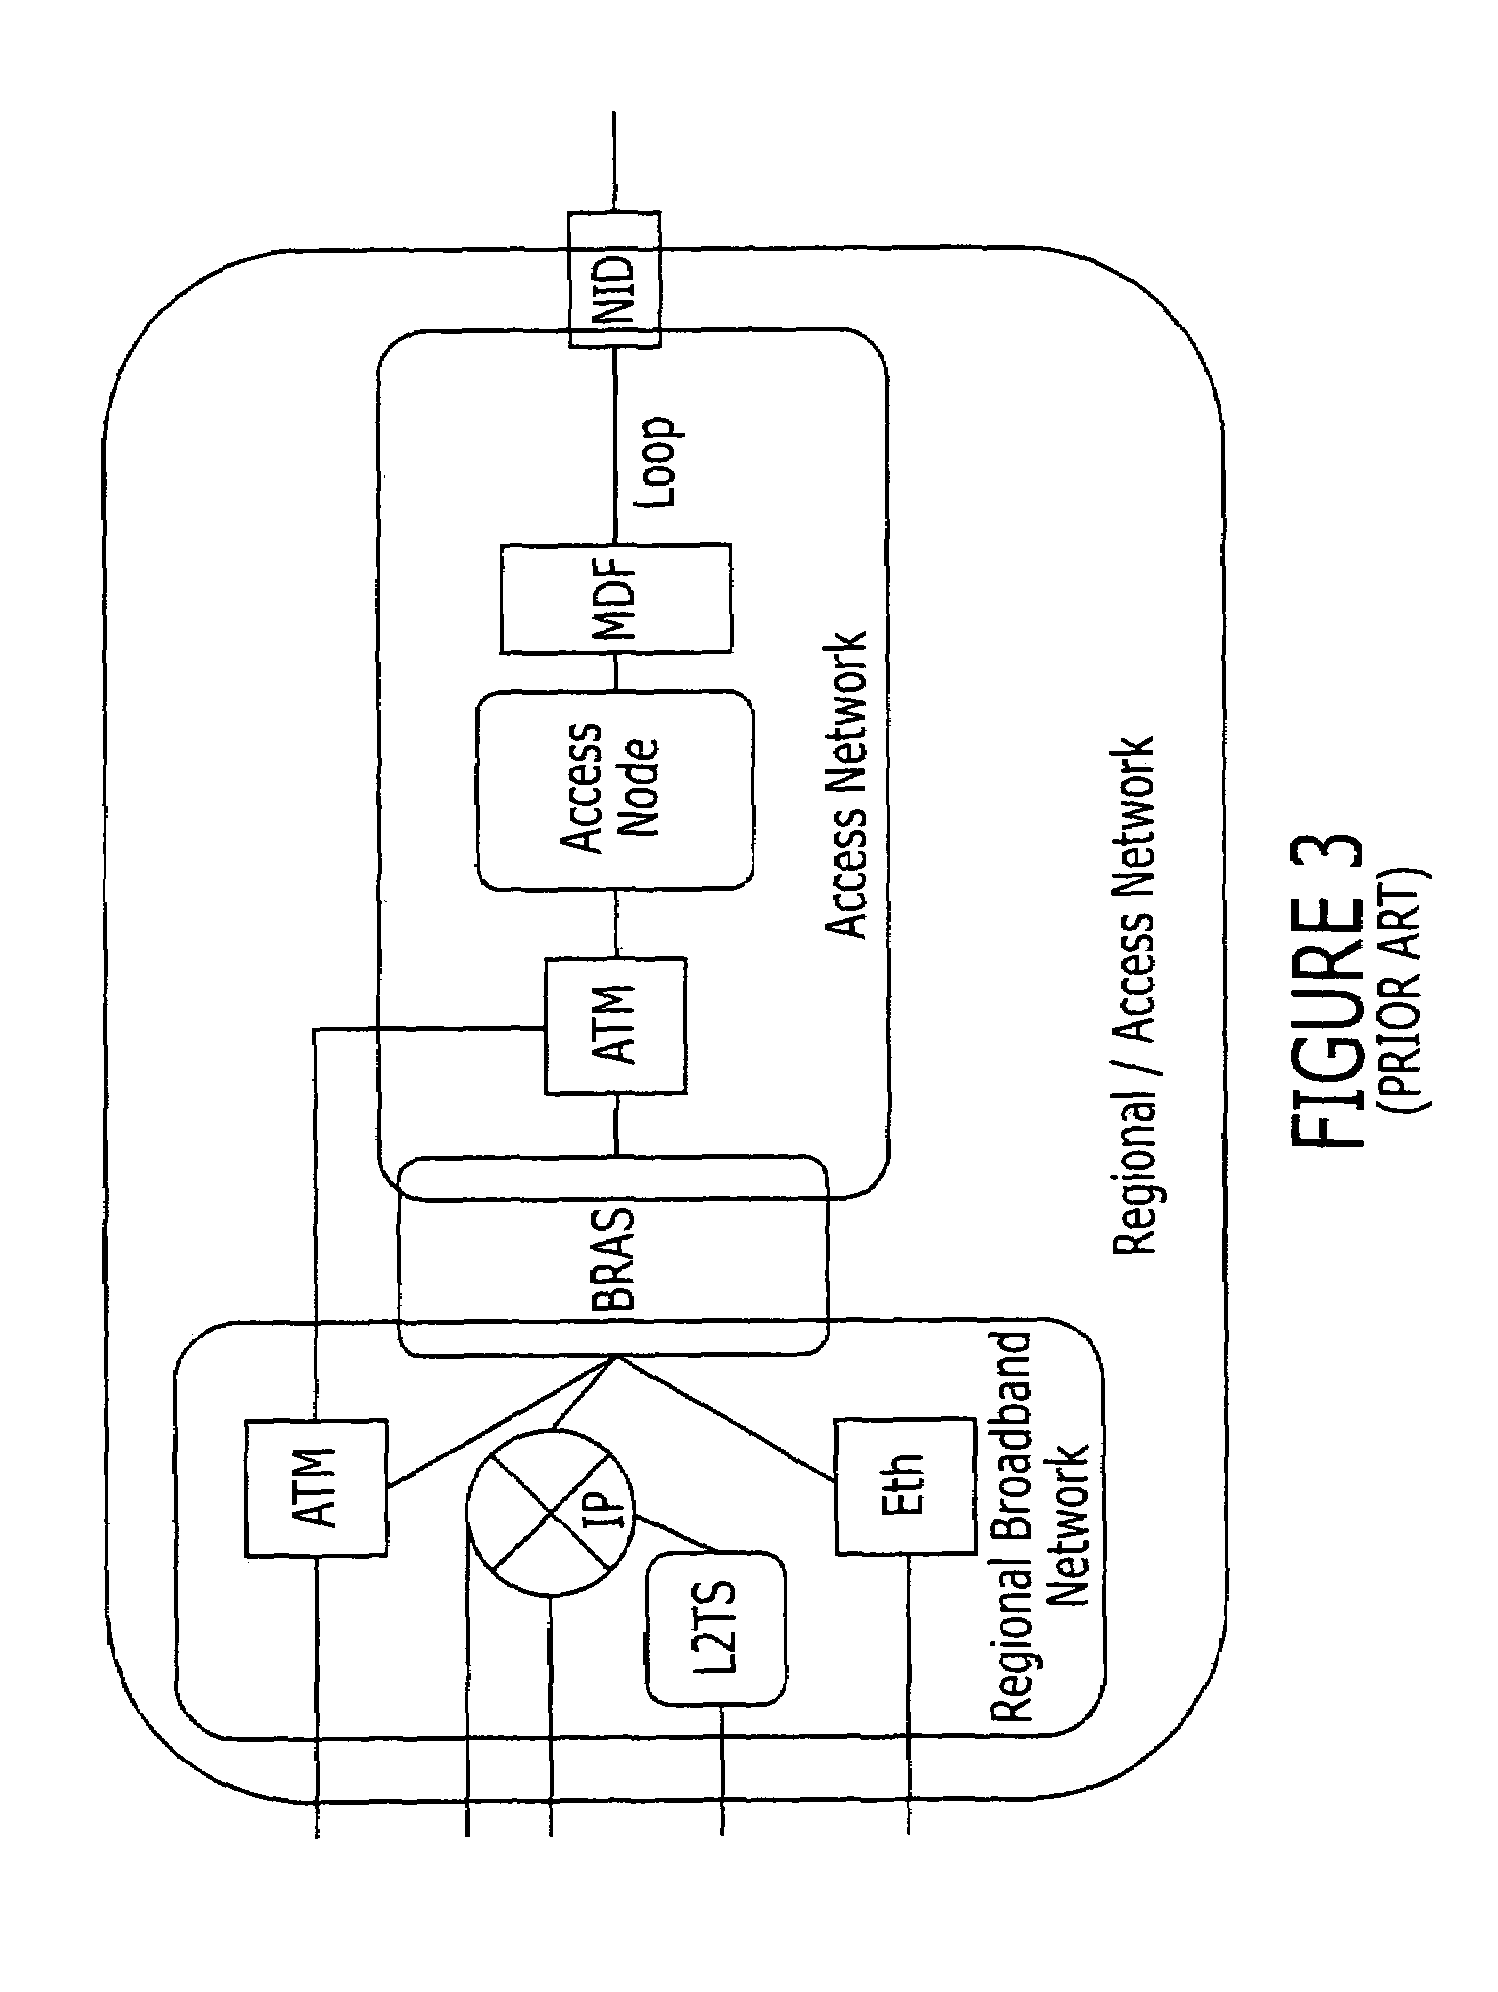 Methods, systems, and computer program products for providing different quality of service/bandwidth allocation to different susbscribers for interactive gaming